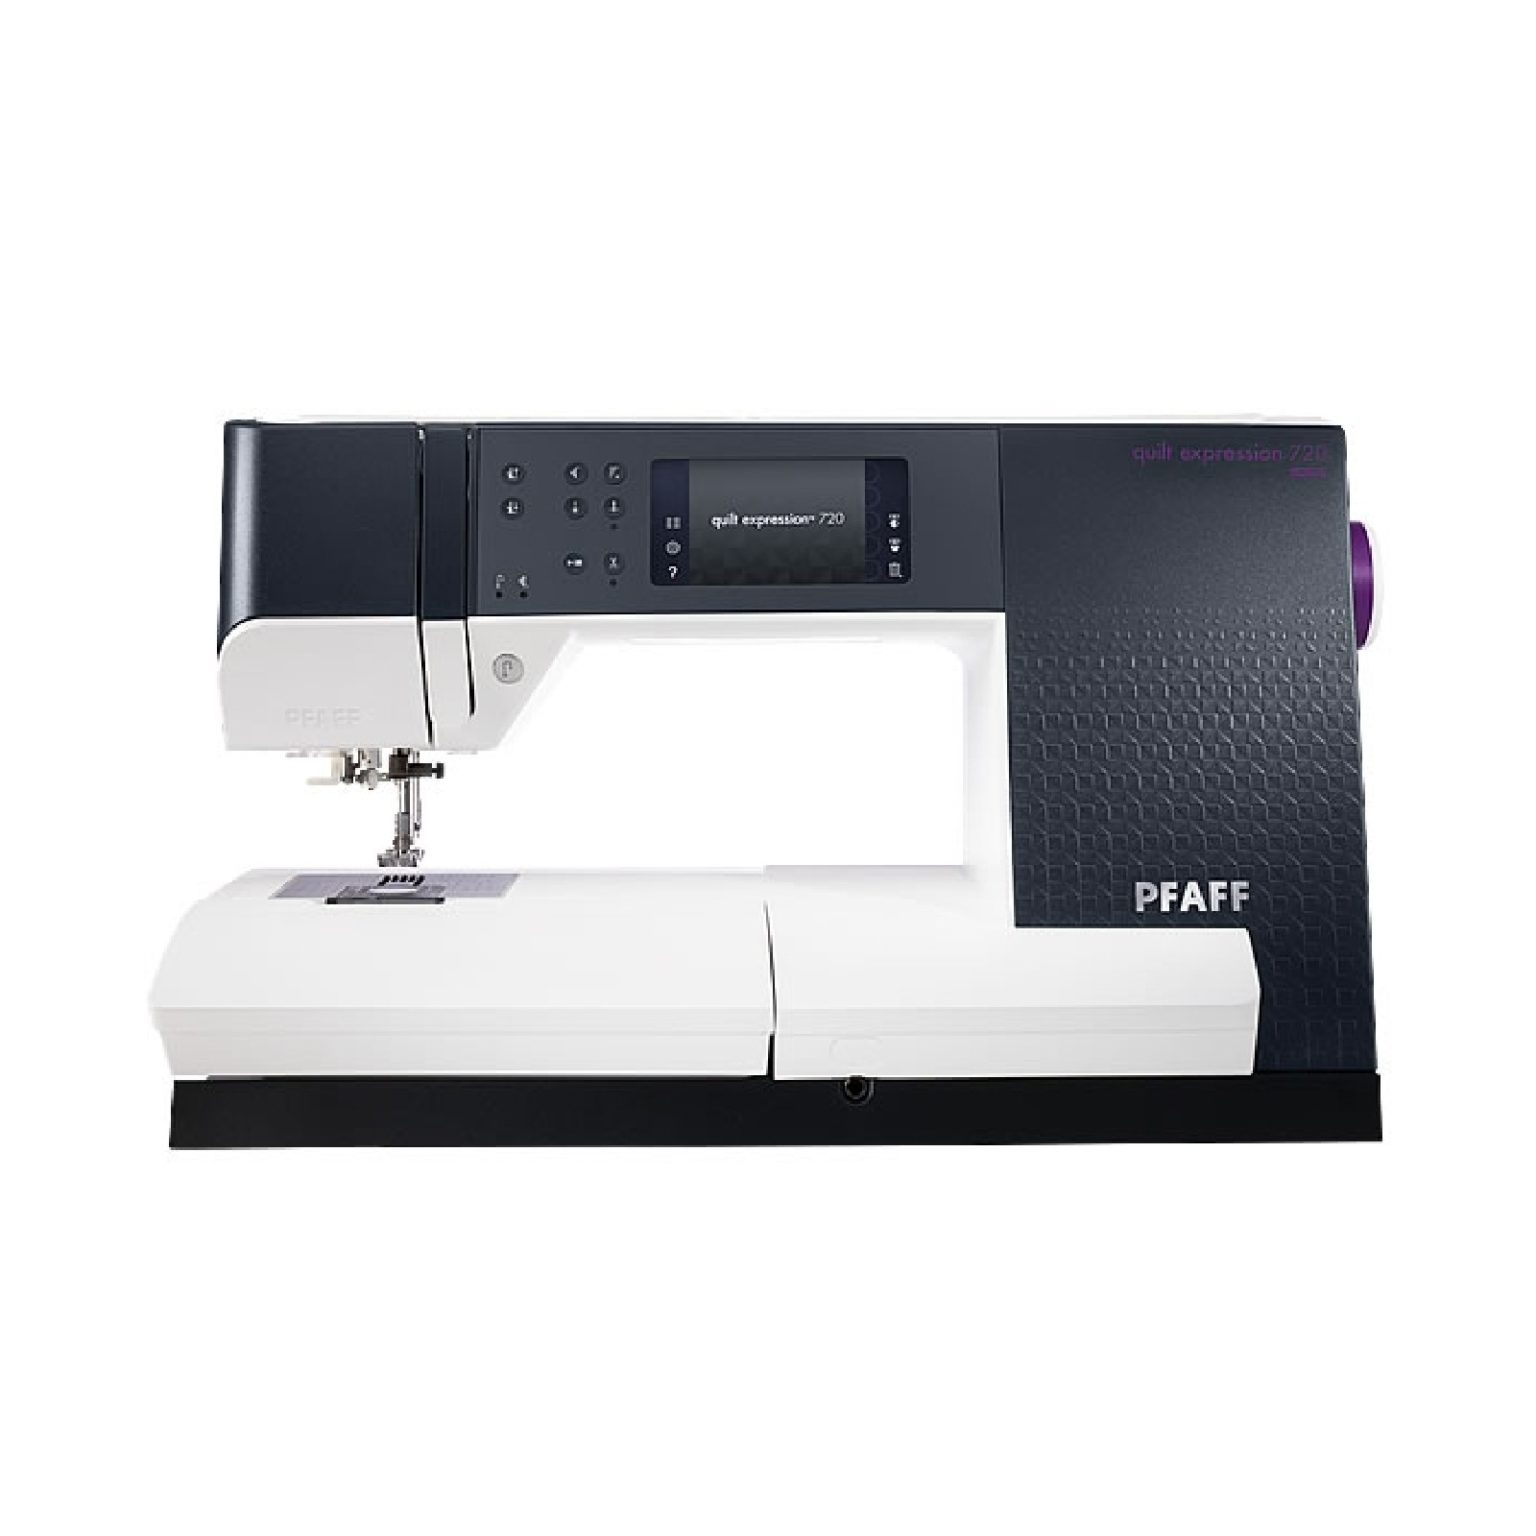 Pfaff Quilt Expression 720 Sewing Machine | More Sewing